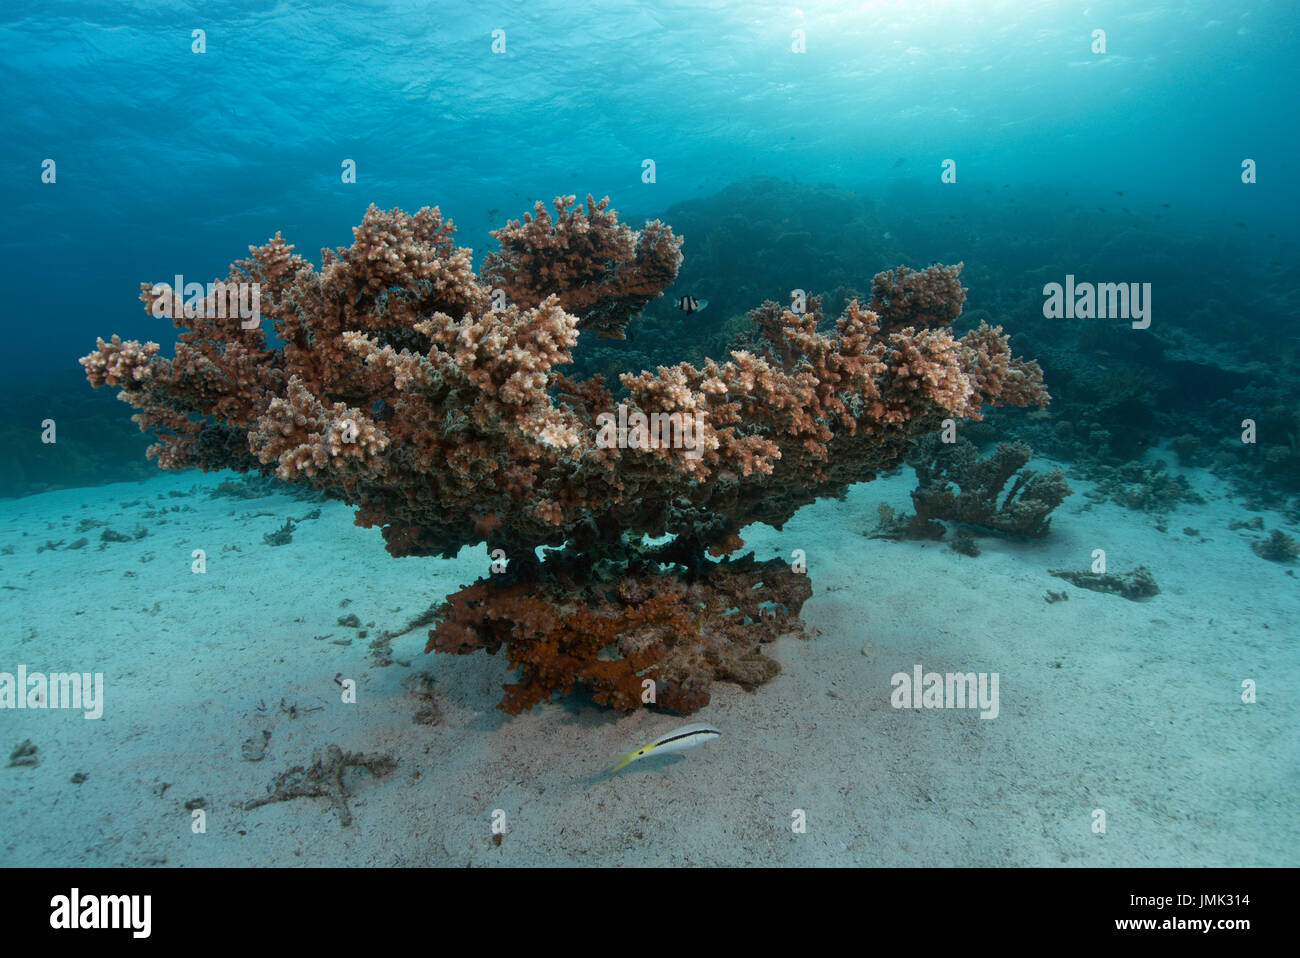 A beautiful healthy coral tree in the crystal clear waters of the Red Sea near Hurghada, Egypt. Stock Photo